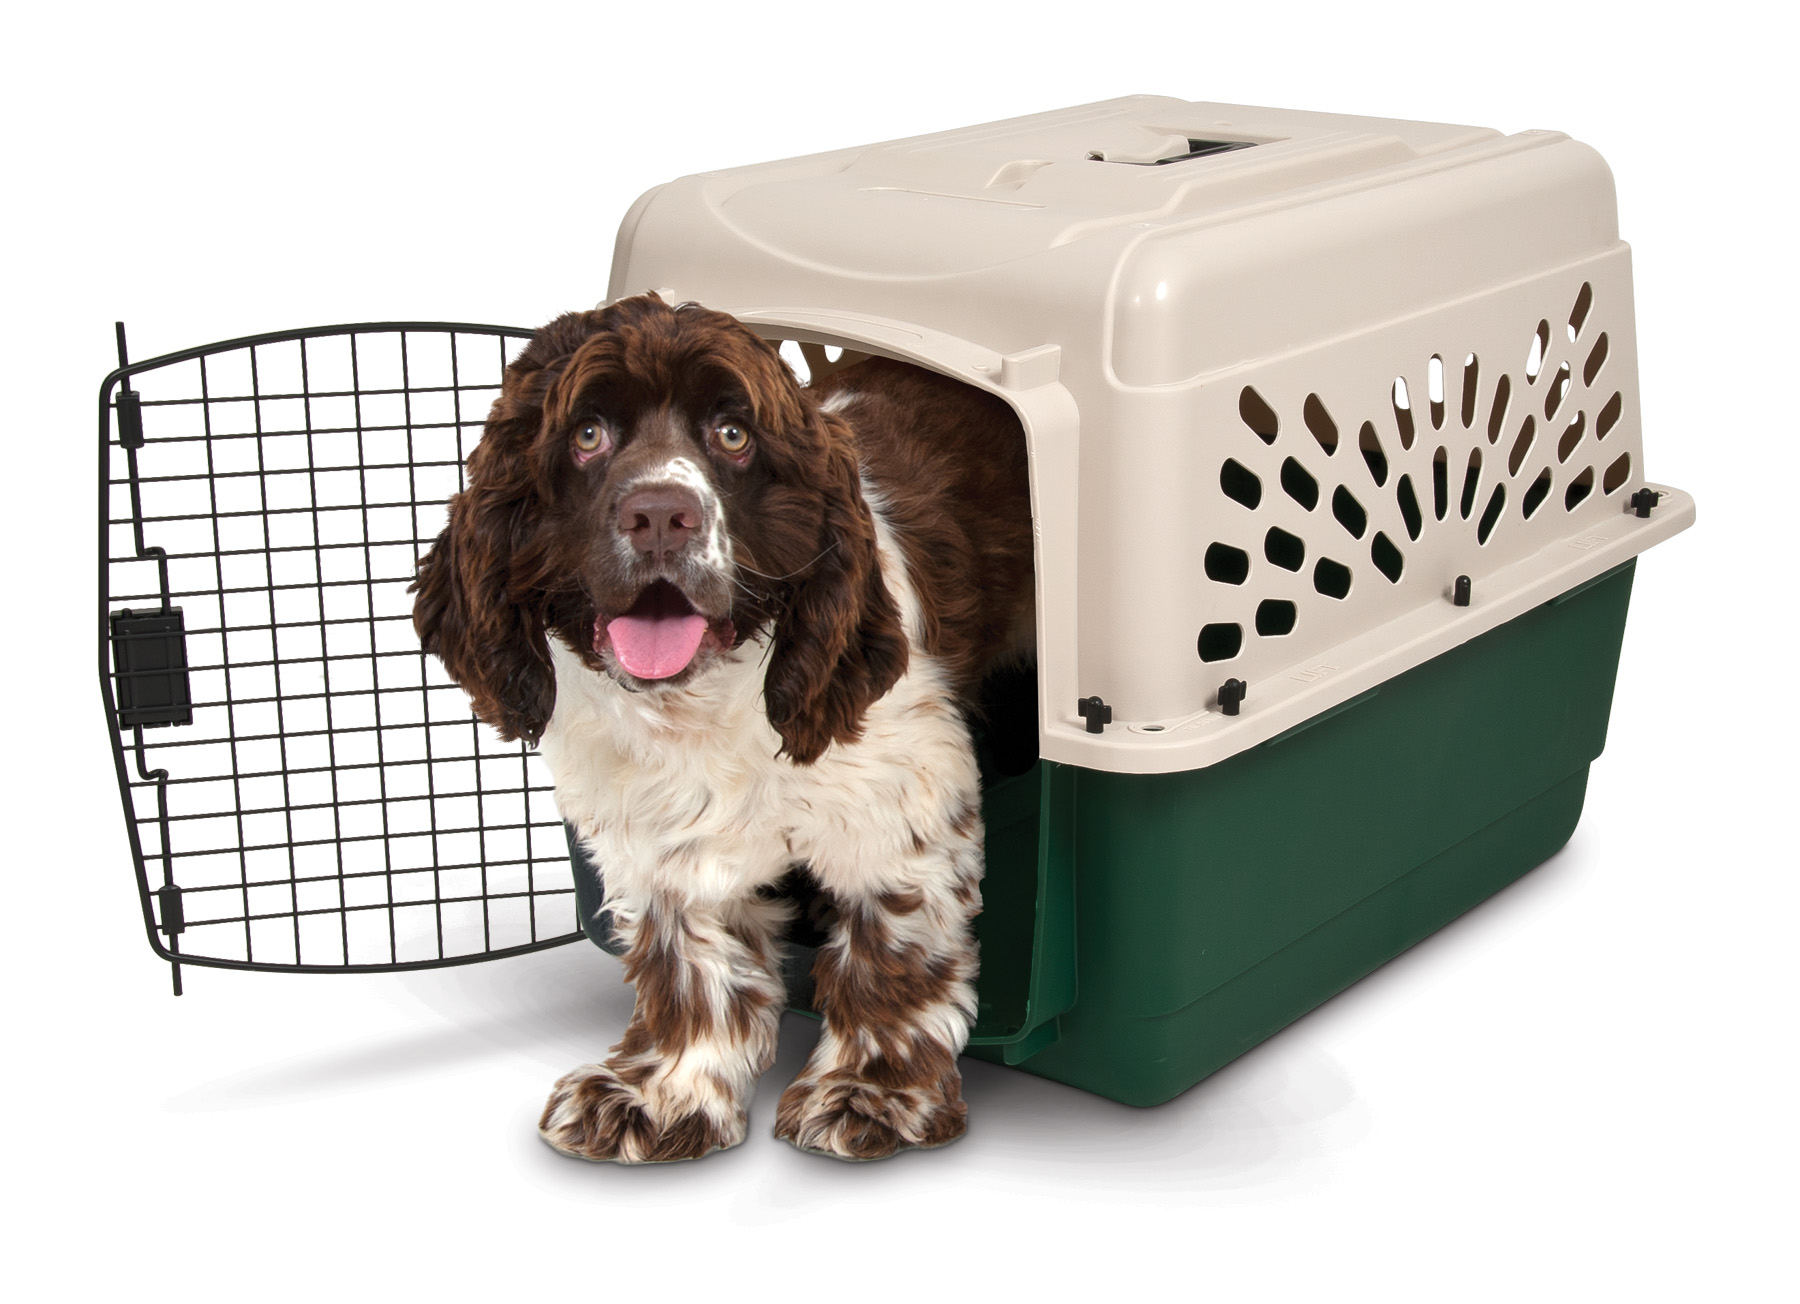 Petmate Ruffmaxx 28" Portable Dog Kennel Plastoc Pet Carrier for Dogs 20 to 30 lb, Tan/Green - image 5 of 9